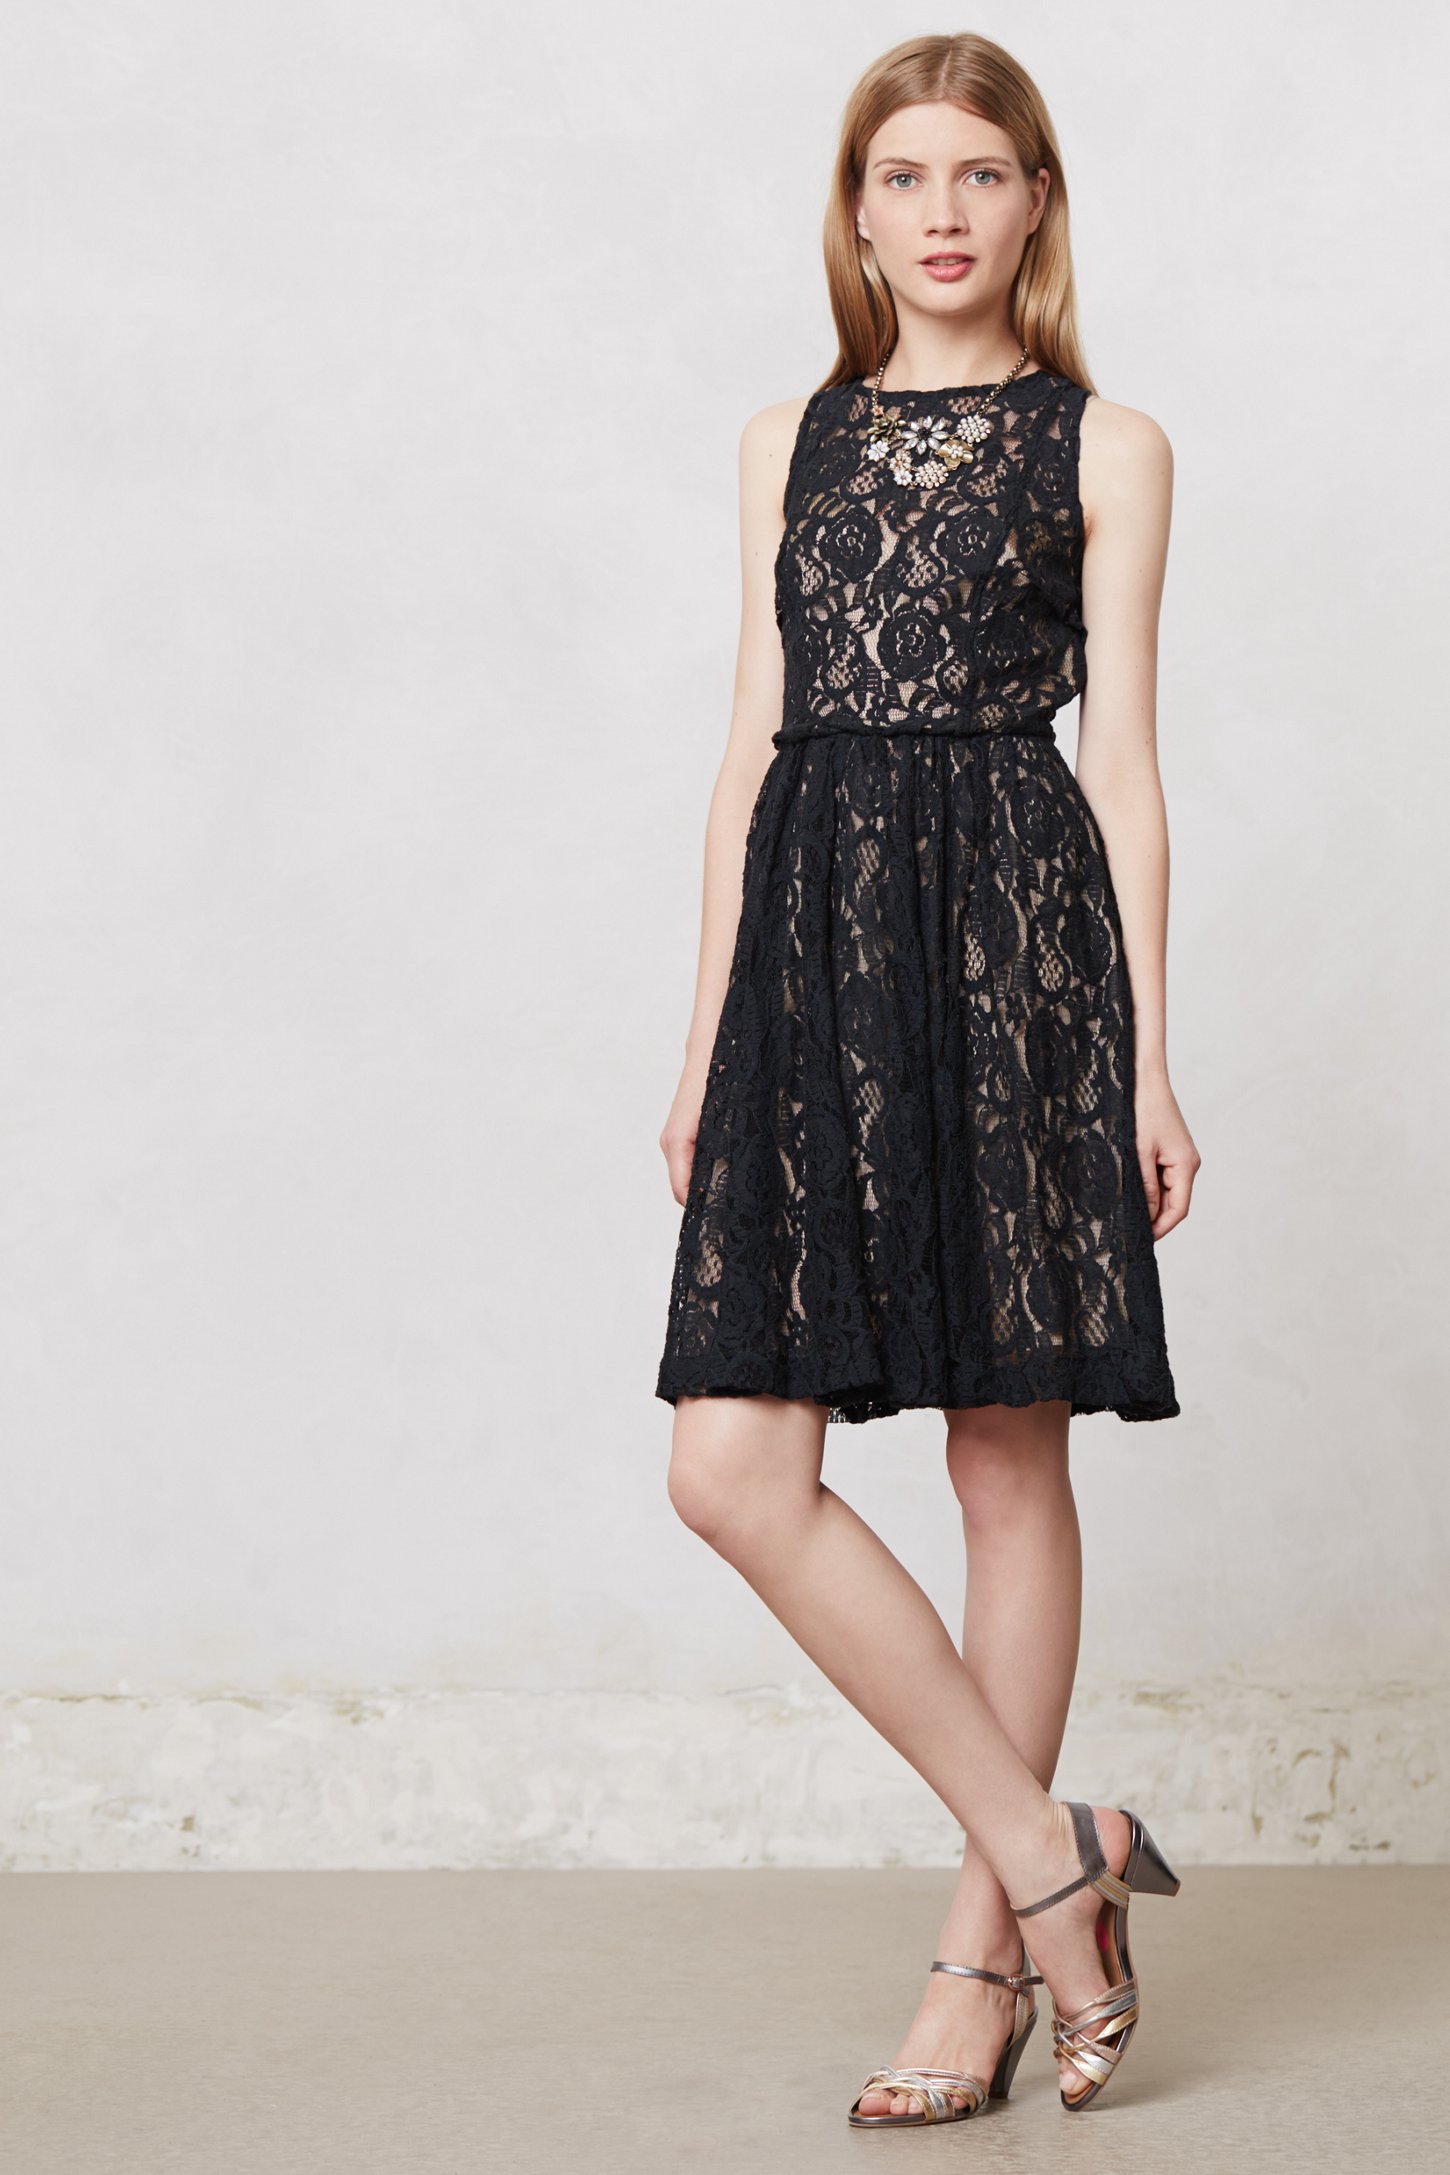 Lyst - Tracy reese Eclipsing Lace Dress in Black